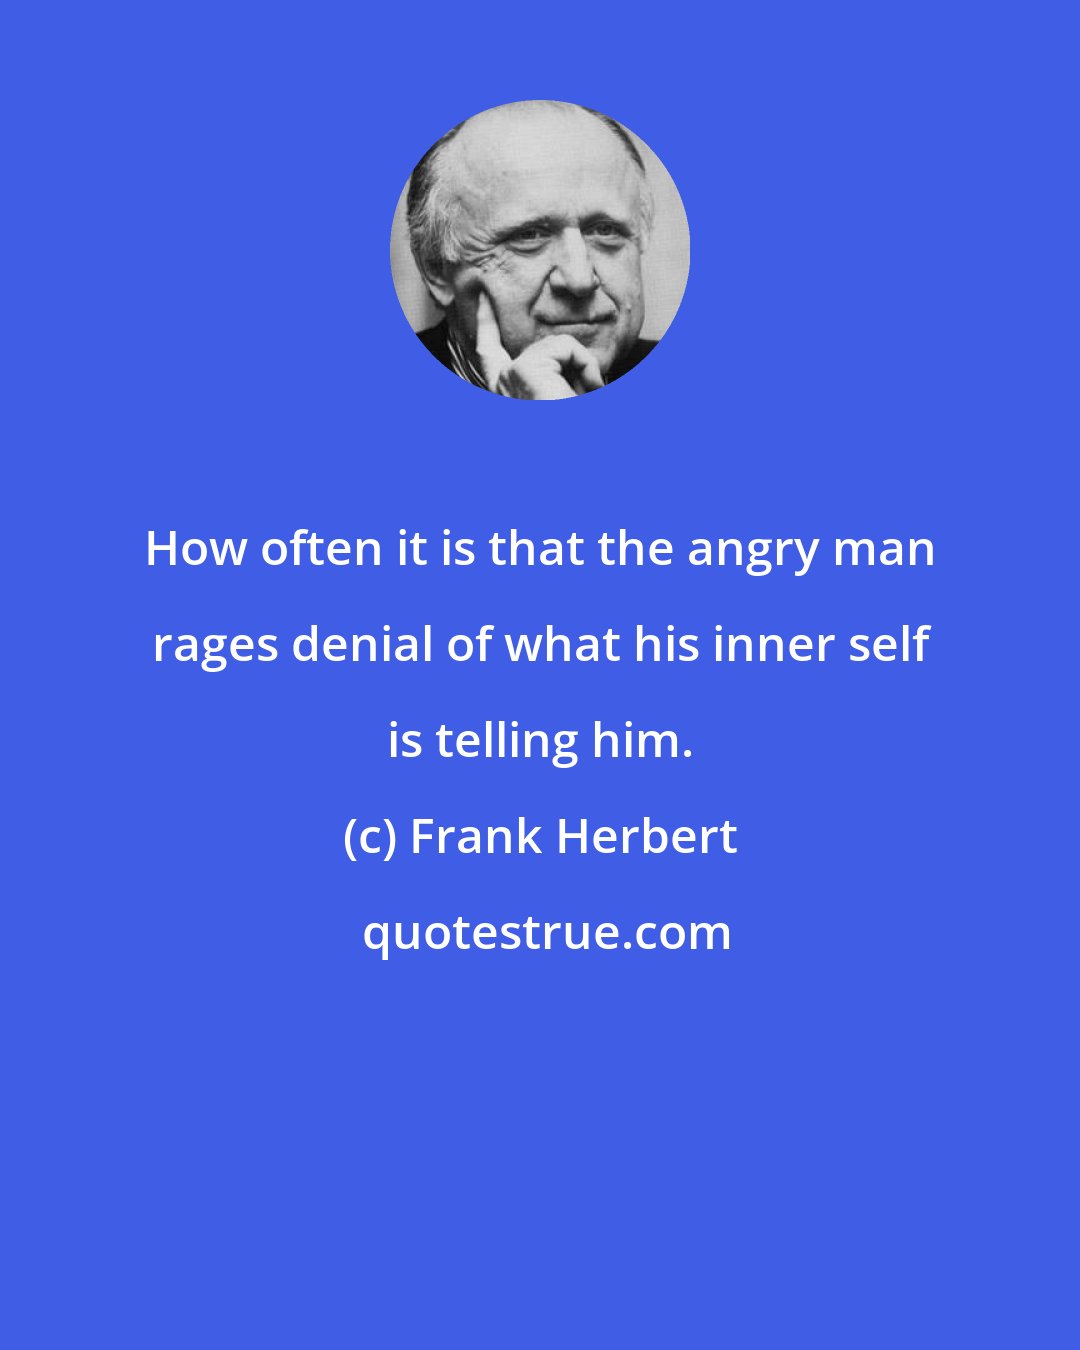 Frank Herbert: How often it is that the angry man rages denial of what his inner self is telling him.